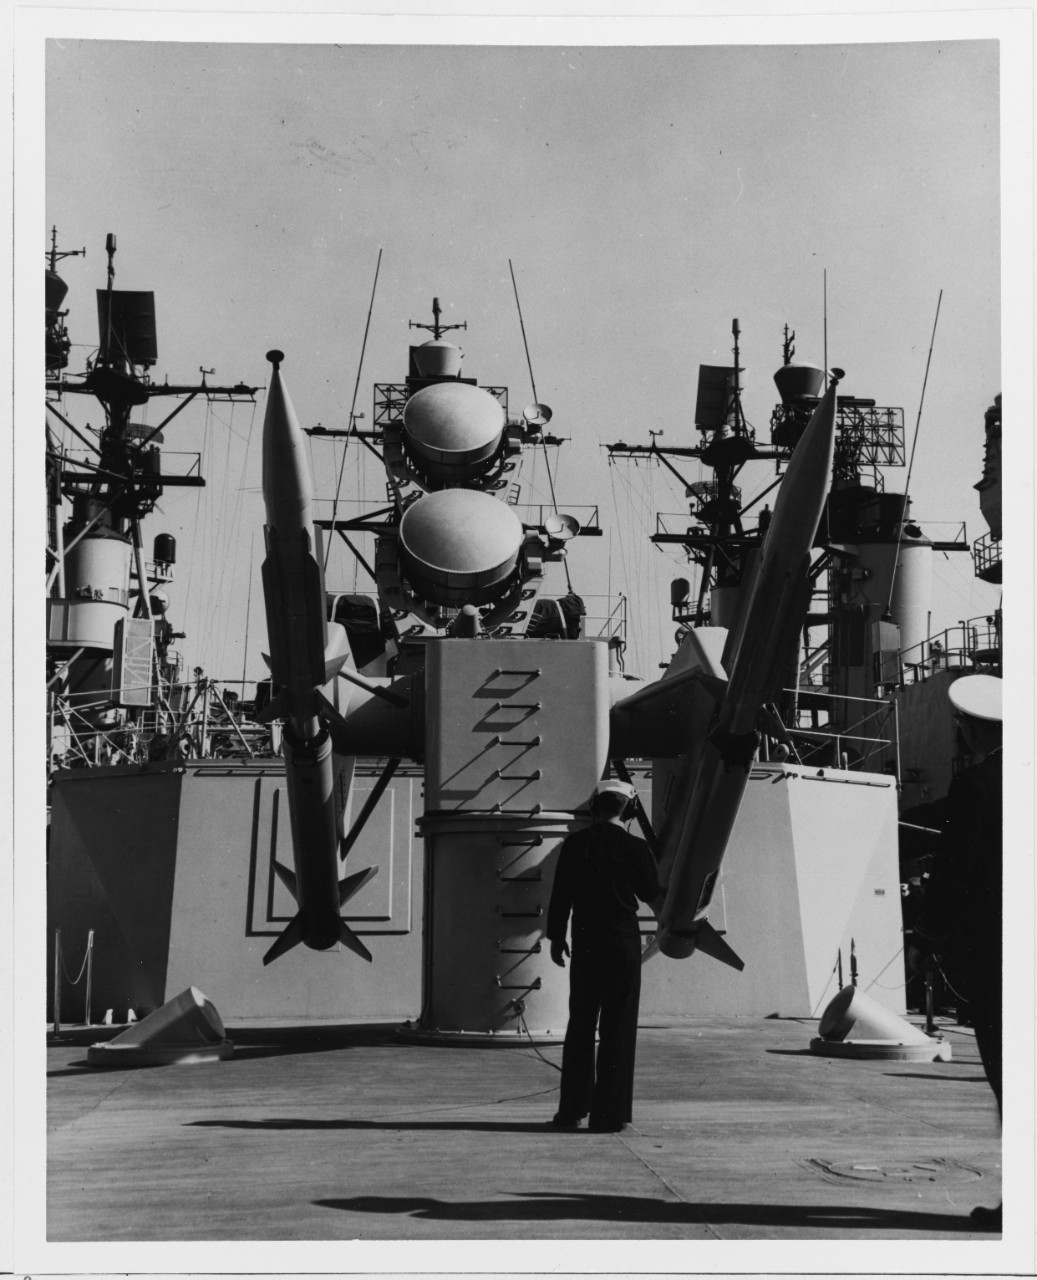 Terrier Missile aboard DLG's tied up at San Diego Harbor, California. 5/19/1961